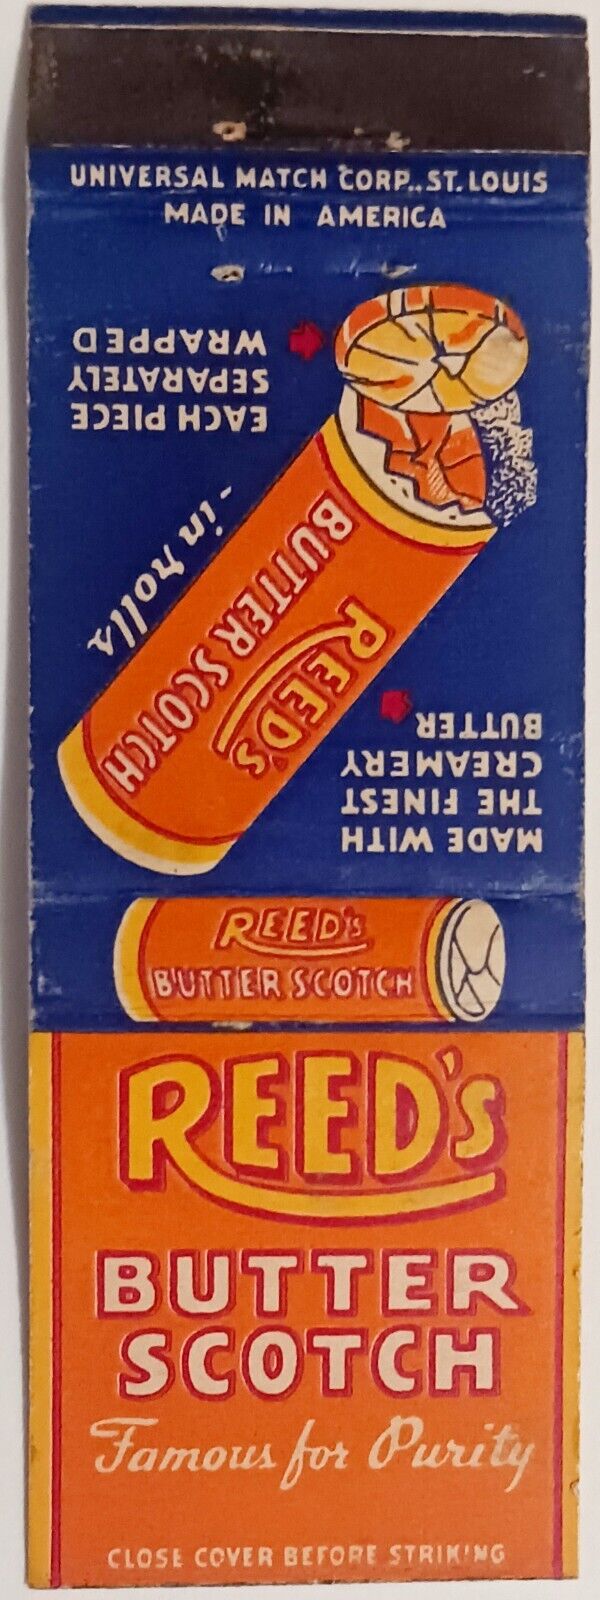 Reed's Butter Scotch Candy Vintage Matchbook Cover